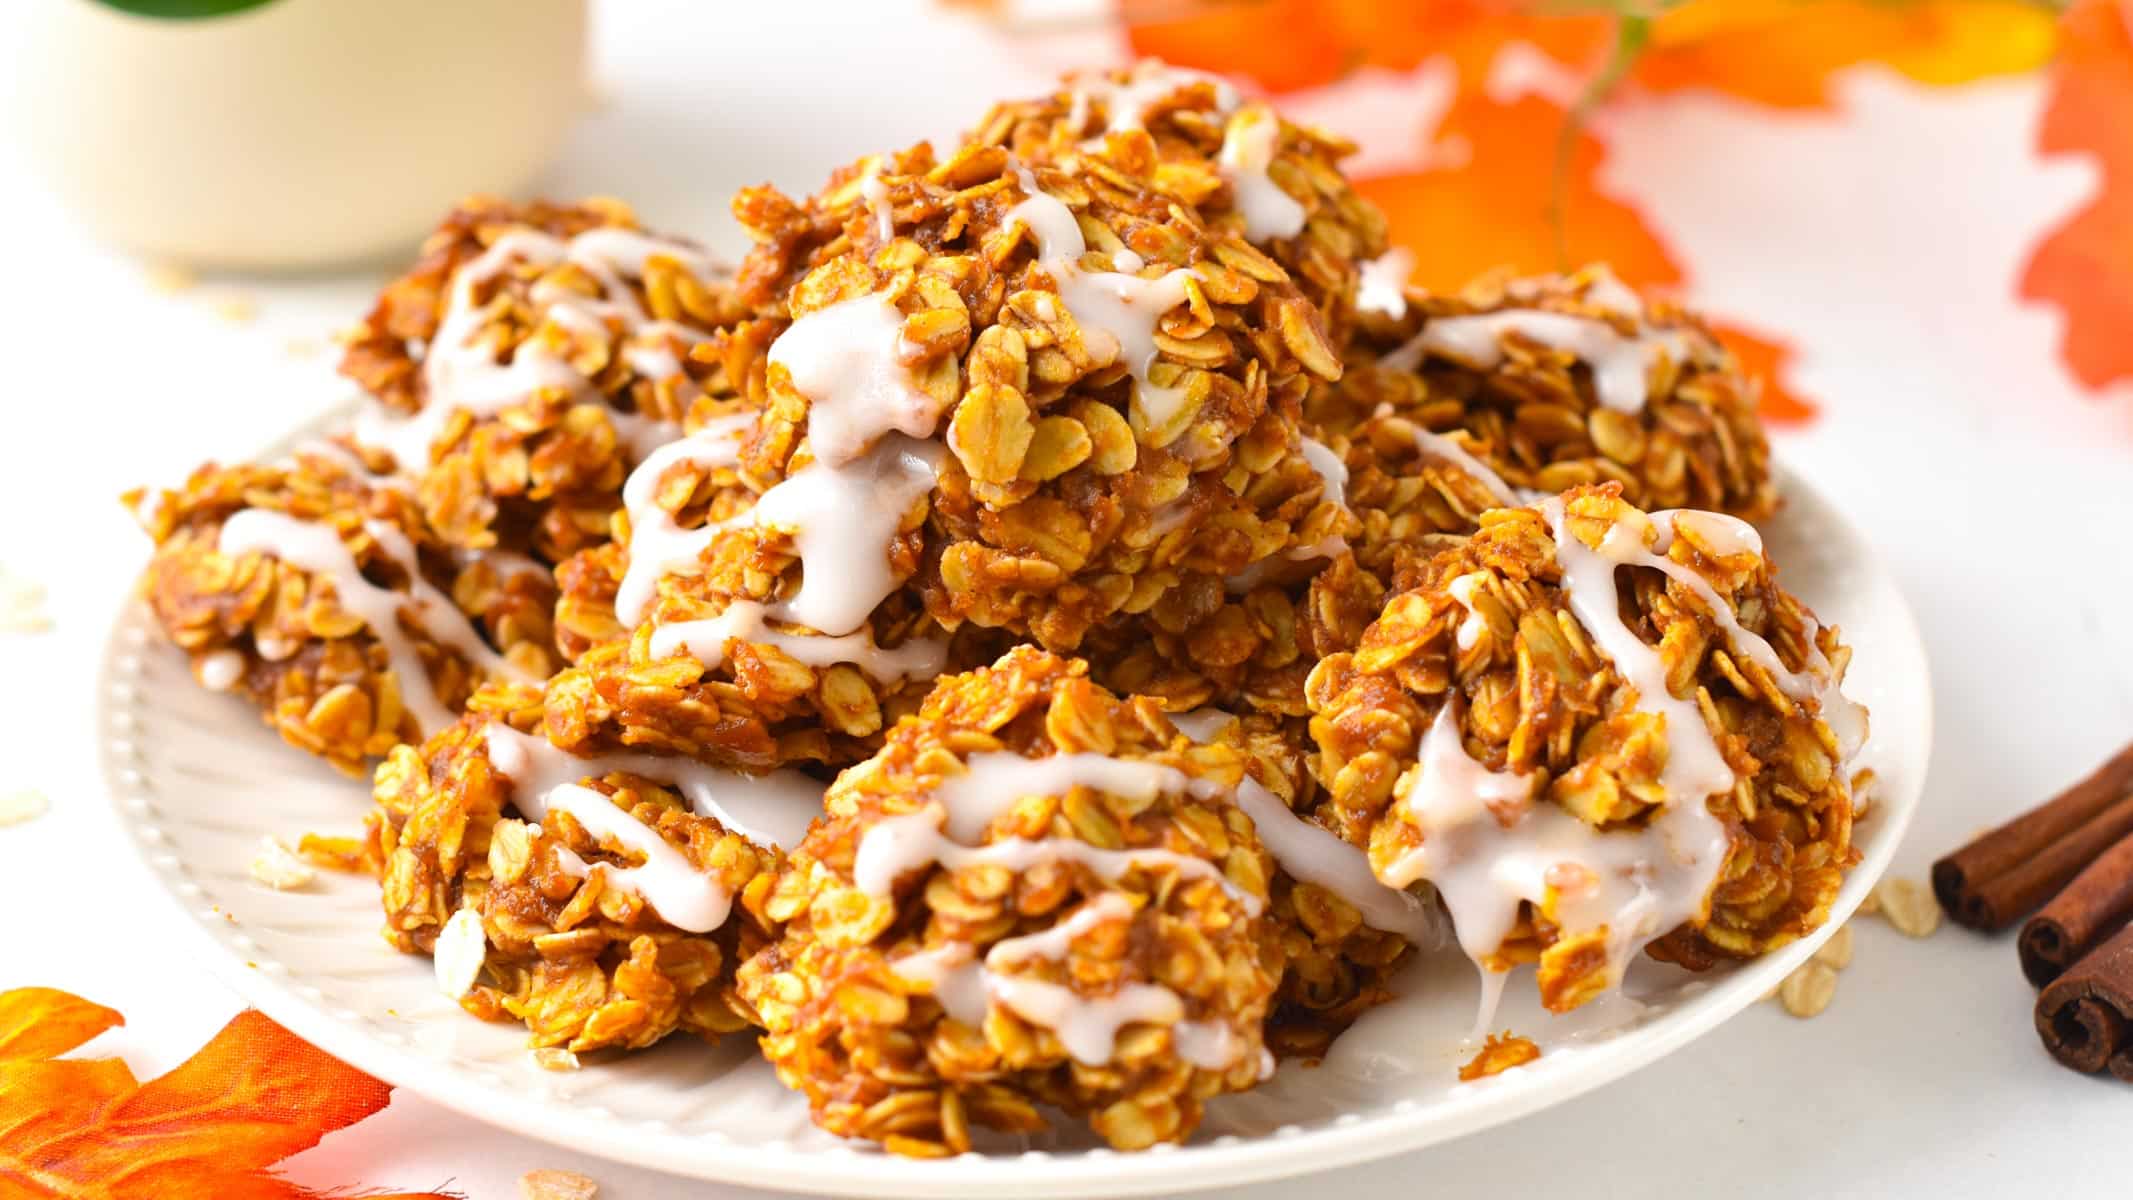 A plate filled with a stack of no-bake pumpkin cookies topped with a drizzle of icing sugar.